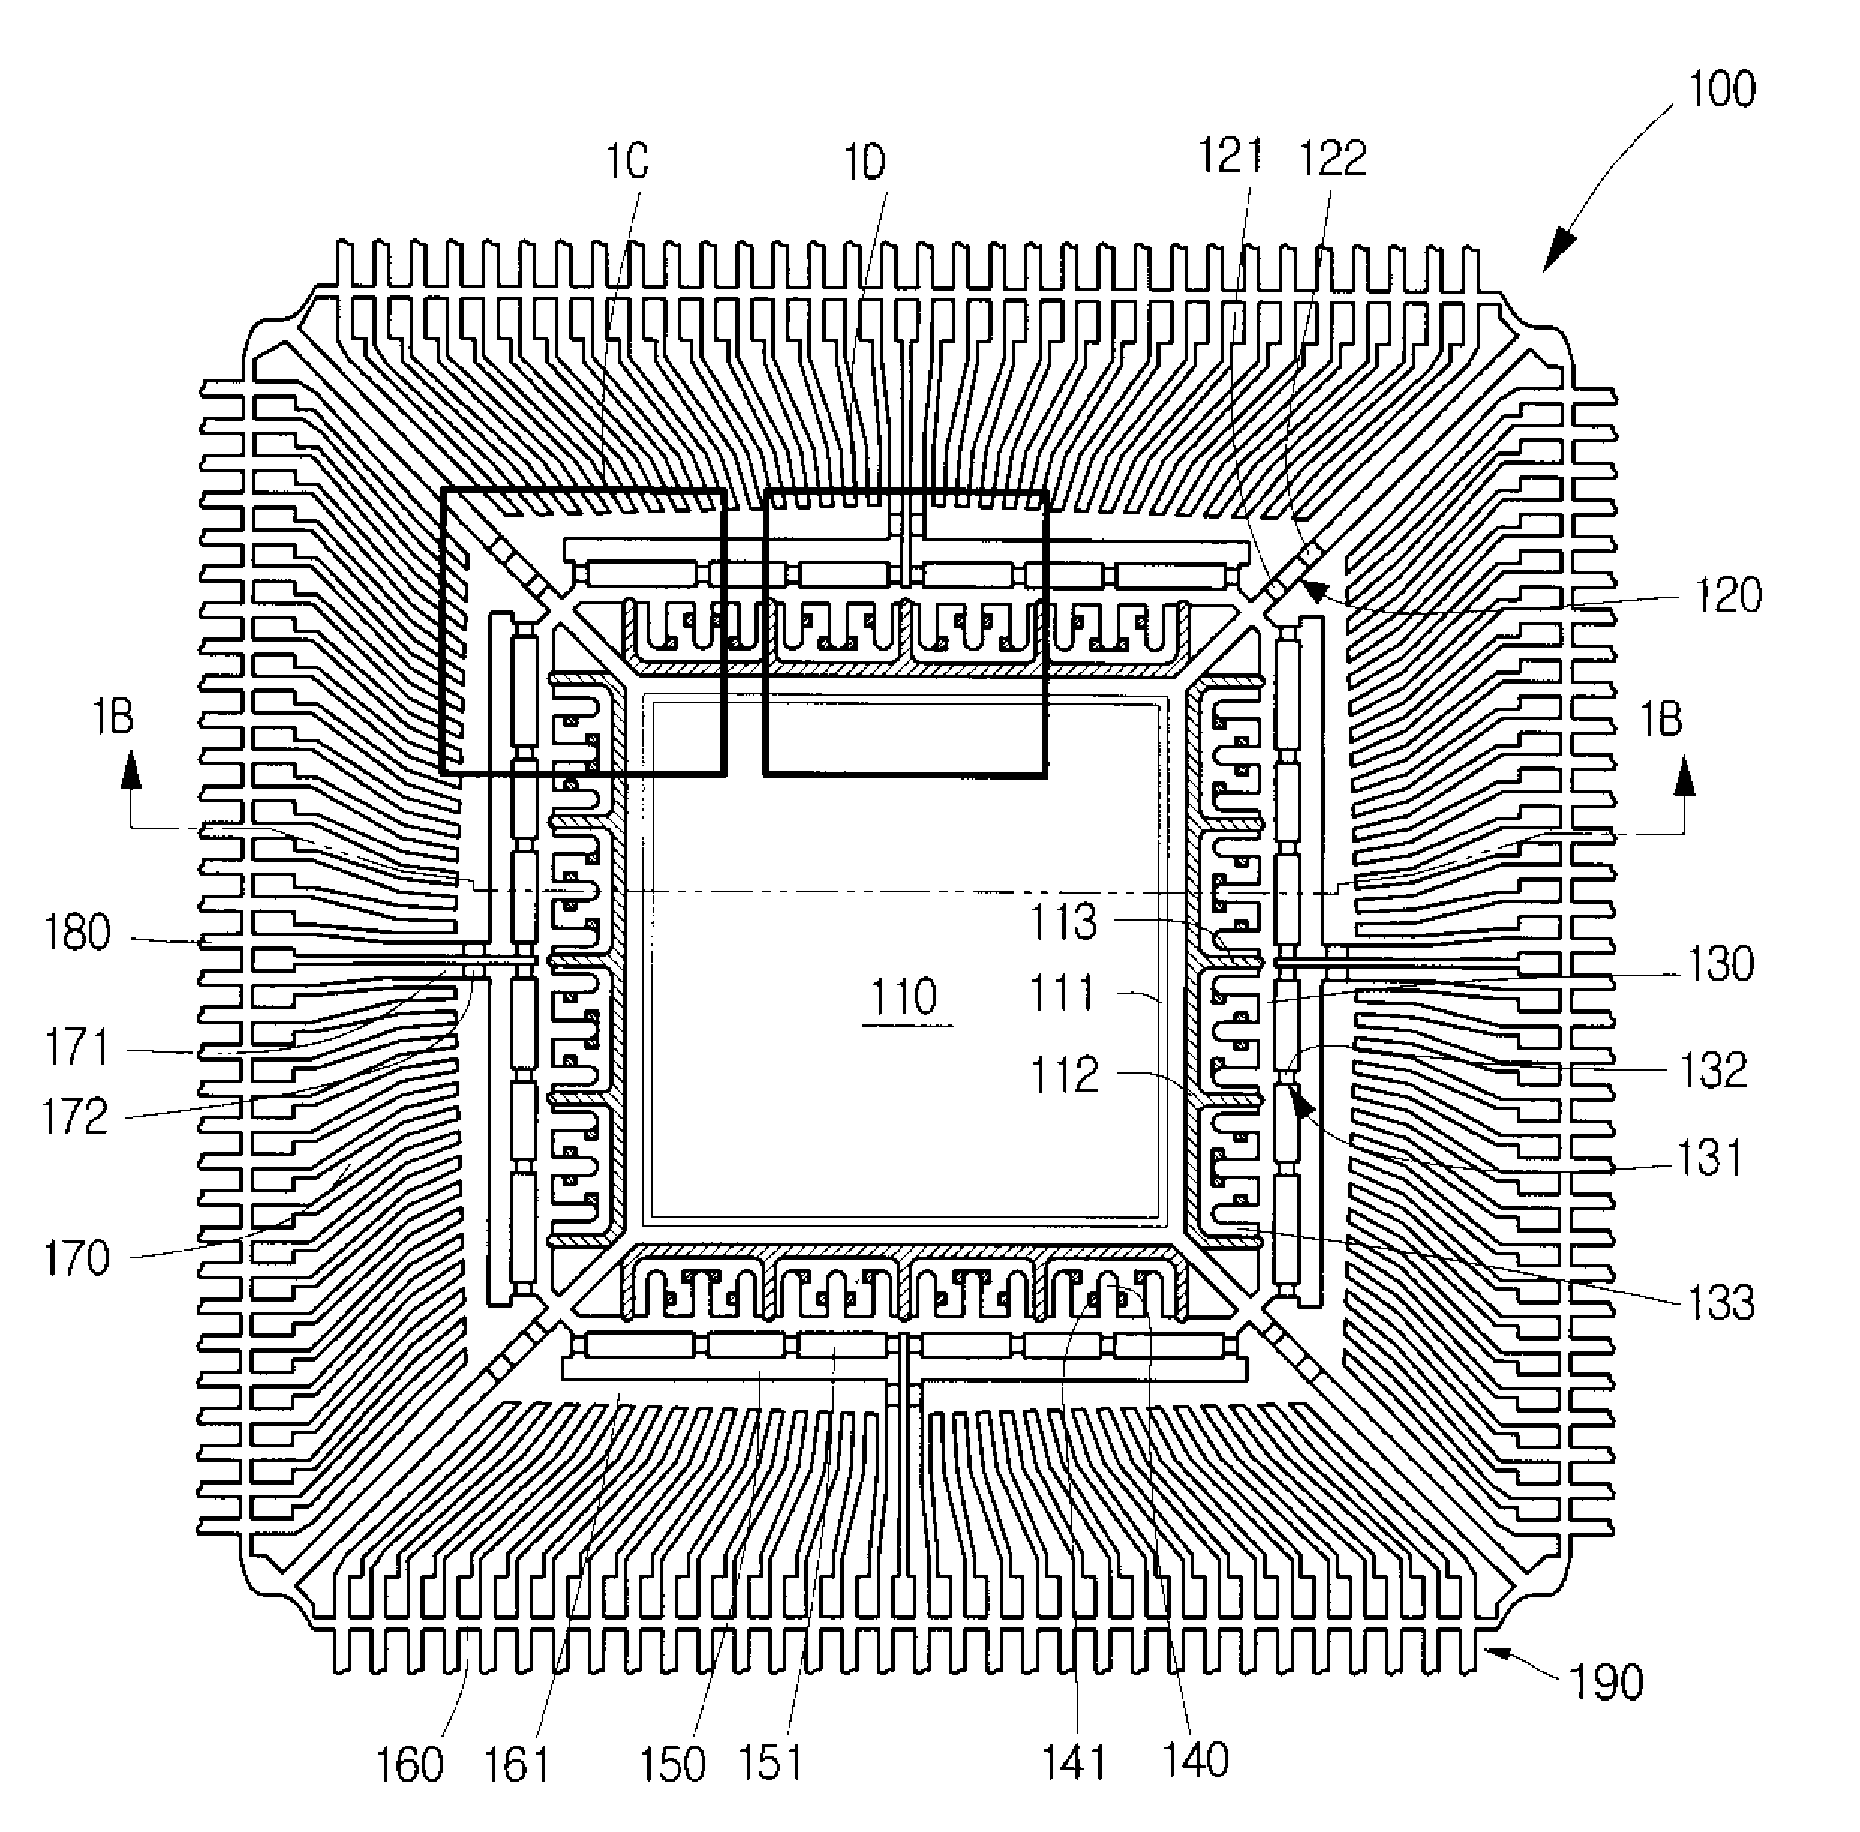 Semiconductor device including leadframe having power bars and increased I/O